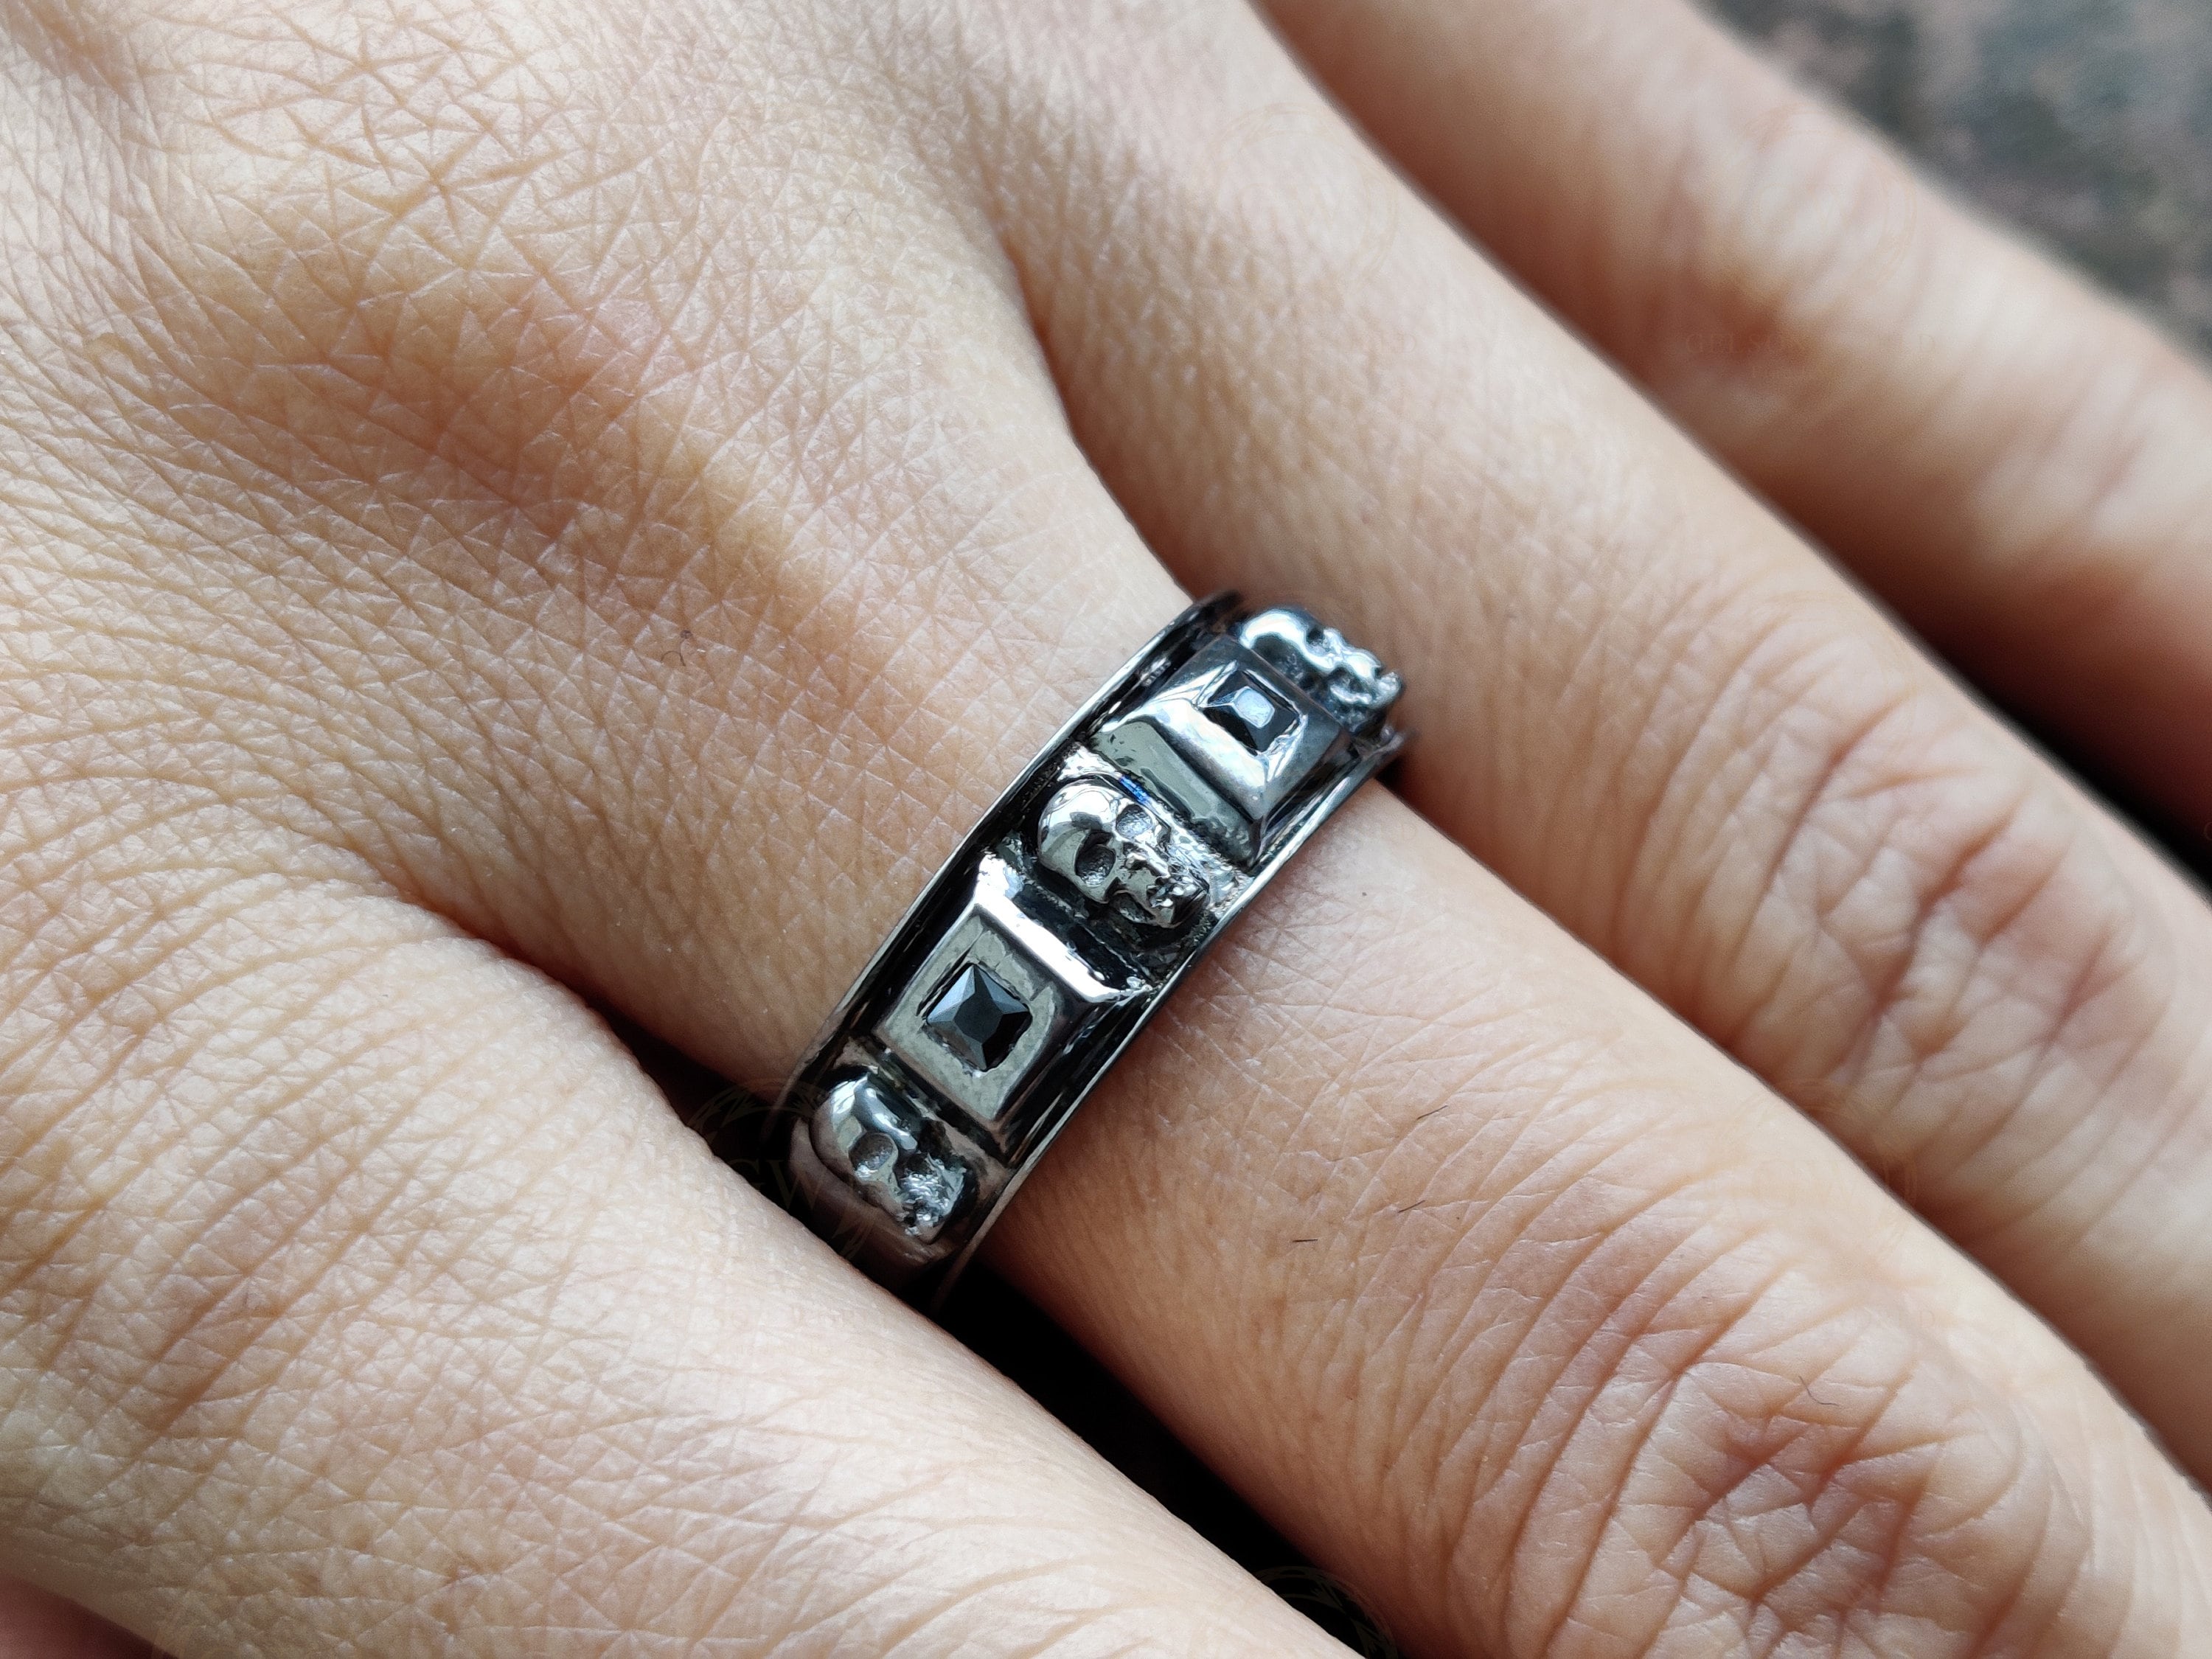 7 mm Wide Men's Gothic Skull Wedding Band, Punk Style Biker Ring, Unique Jewelry, Black CZ Sterling silver, Anniversary Ring, Eternity Band